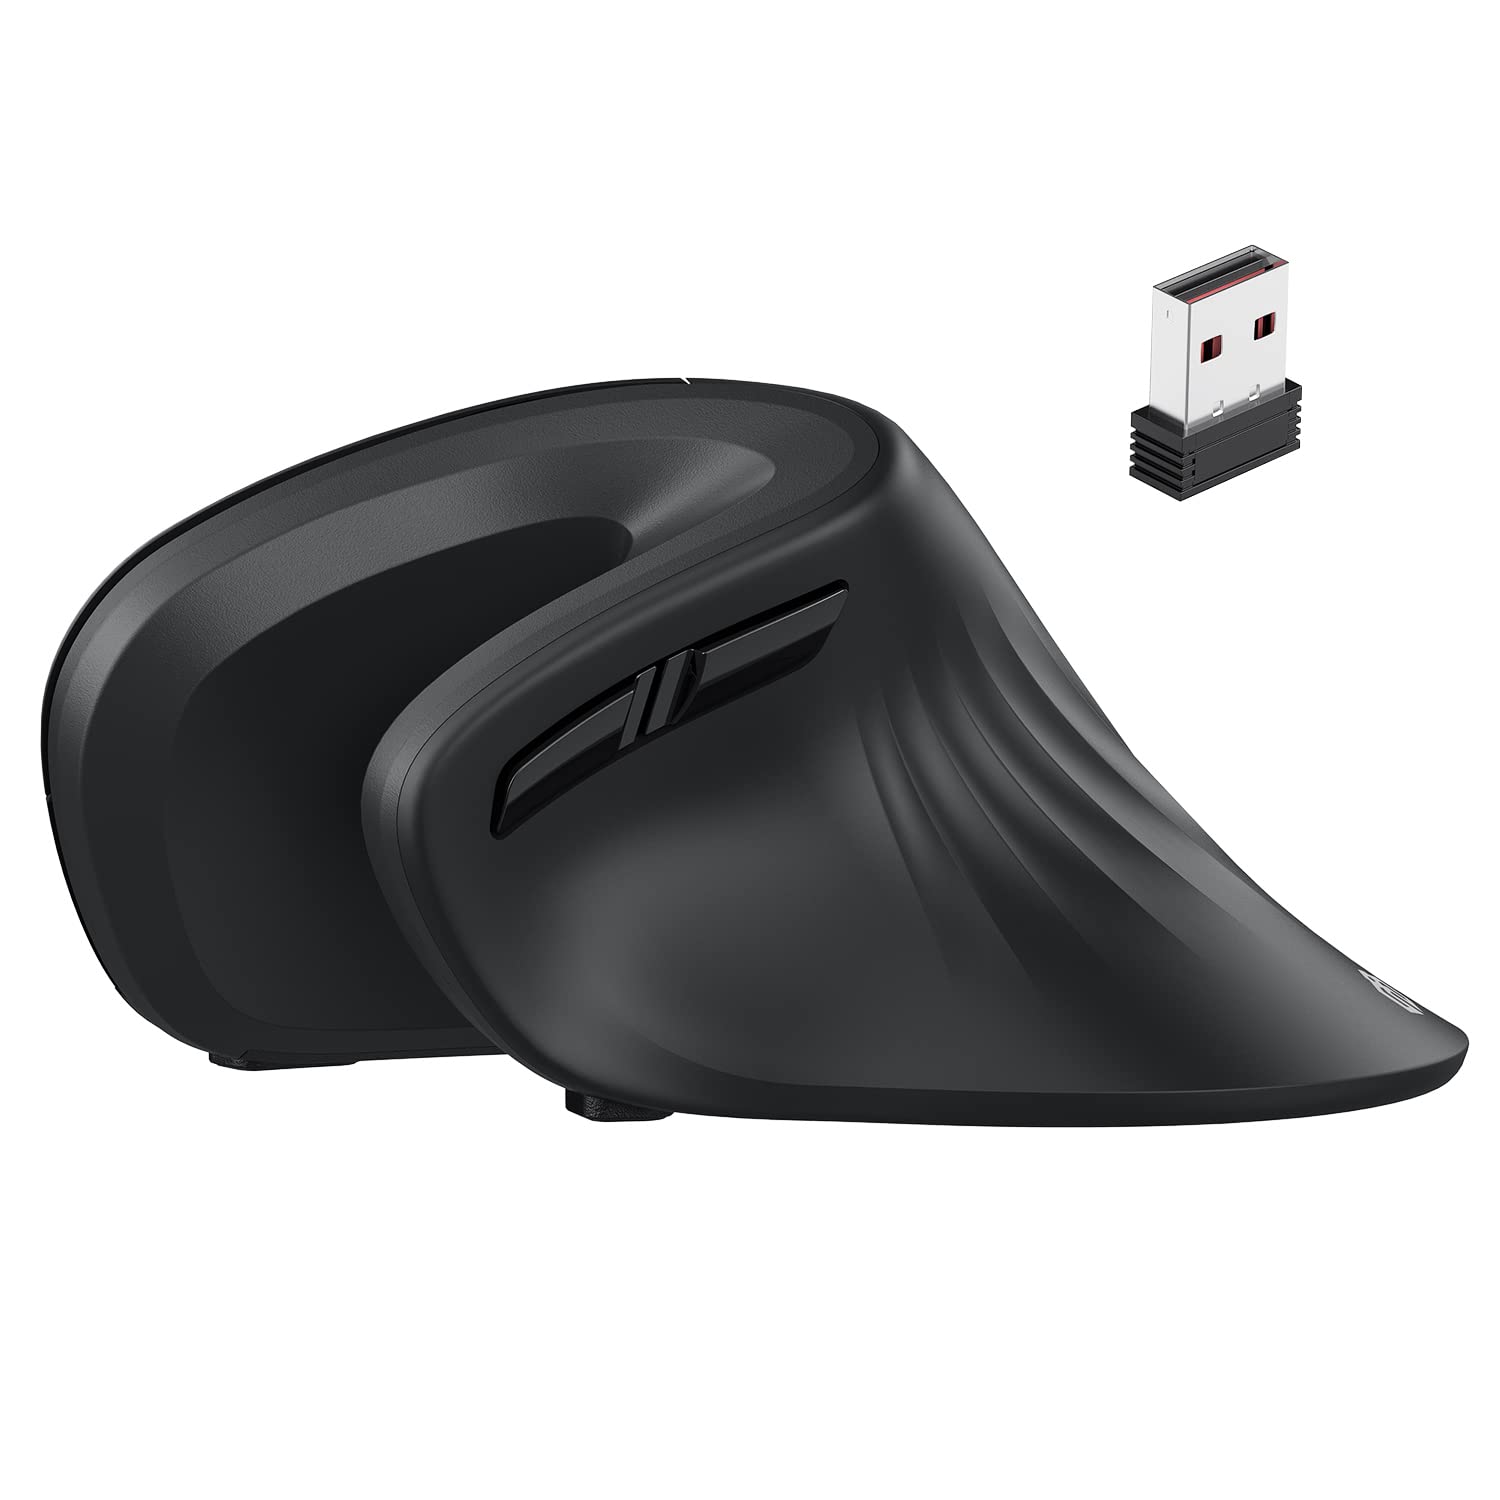 iClever Ergonomic Mouse, Vertical mice